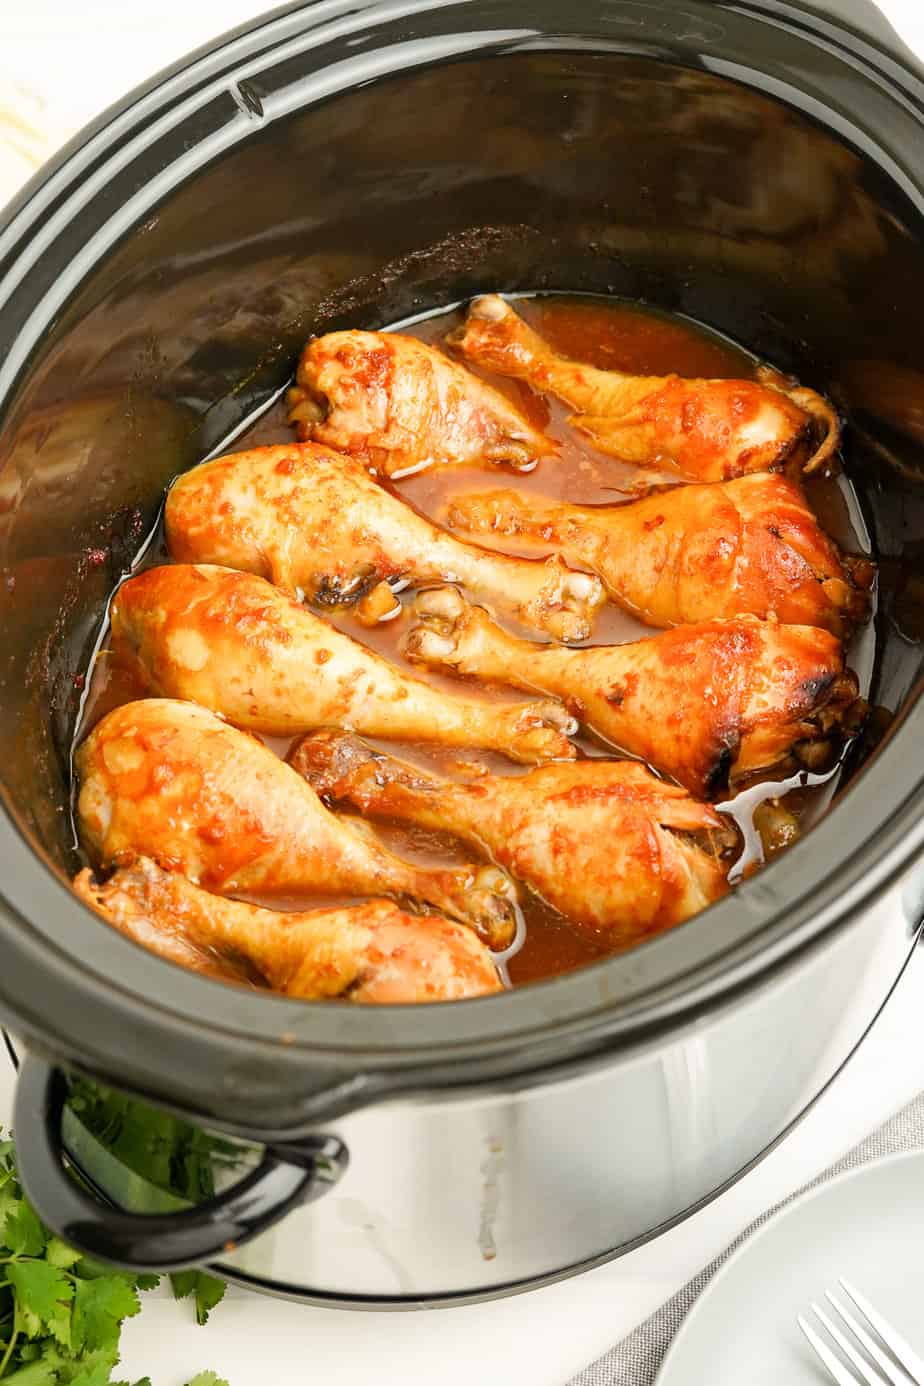 Chicken drumsticks cooked in a brown sauce in a slowcooker from the side.